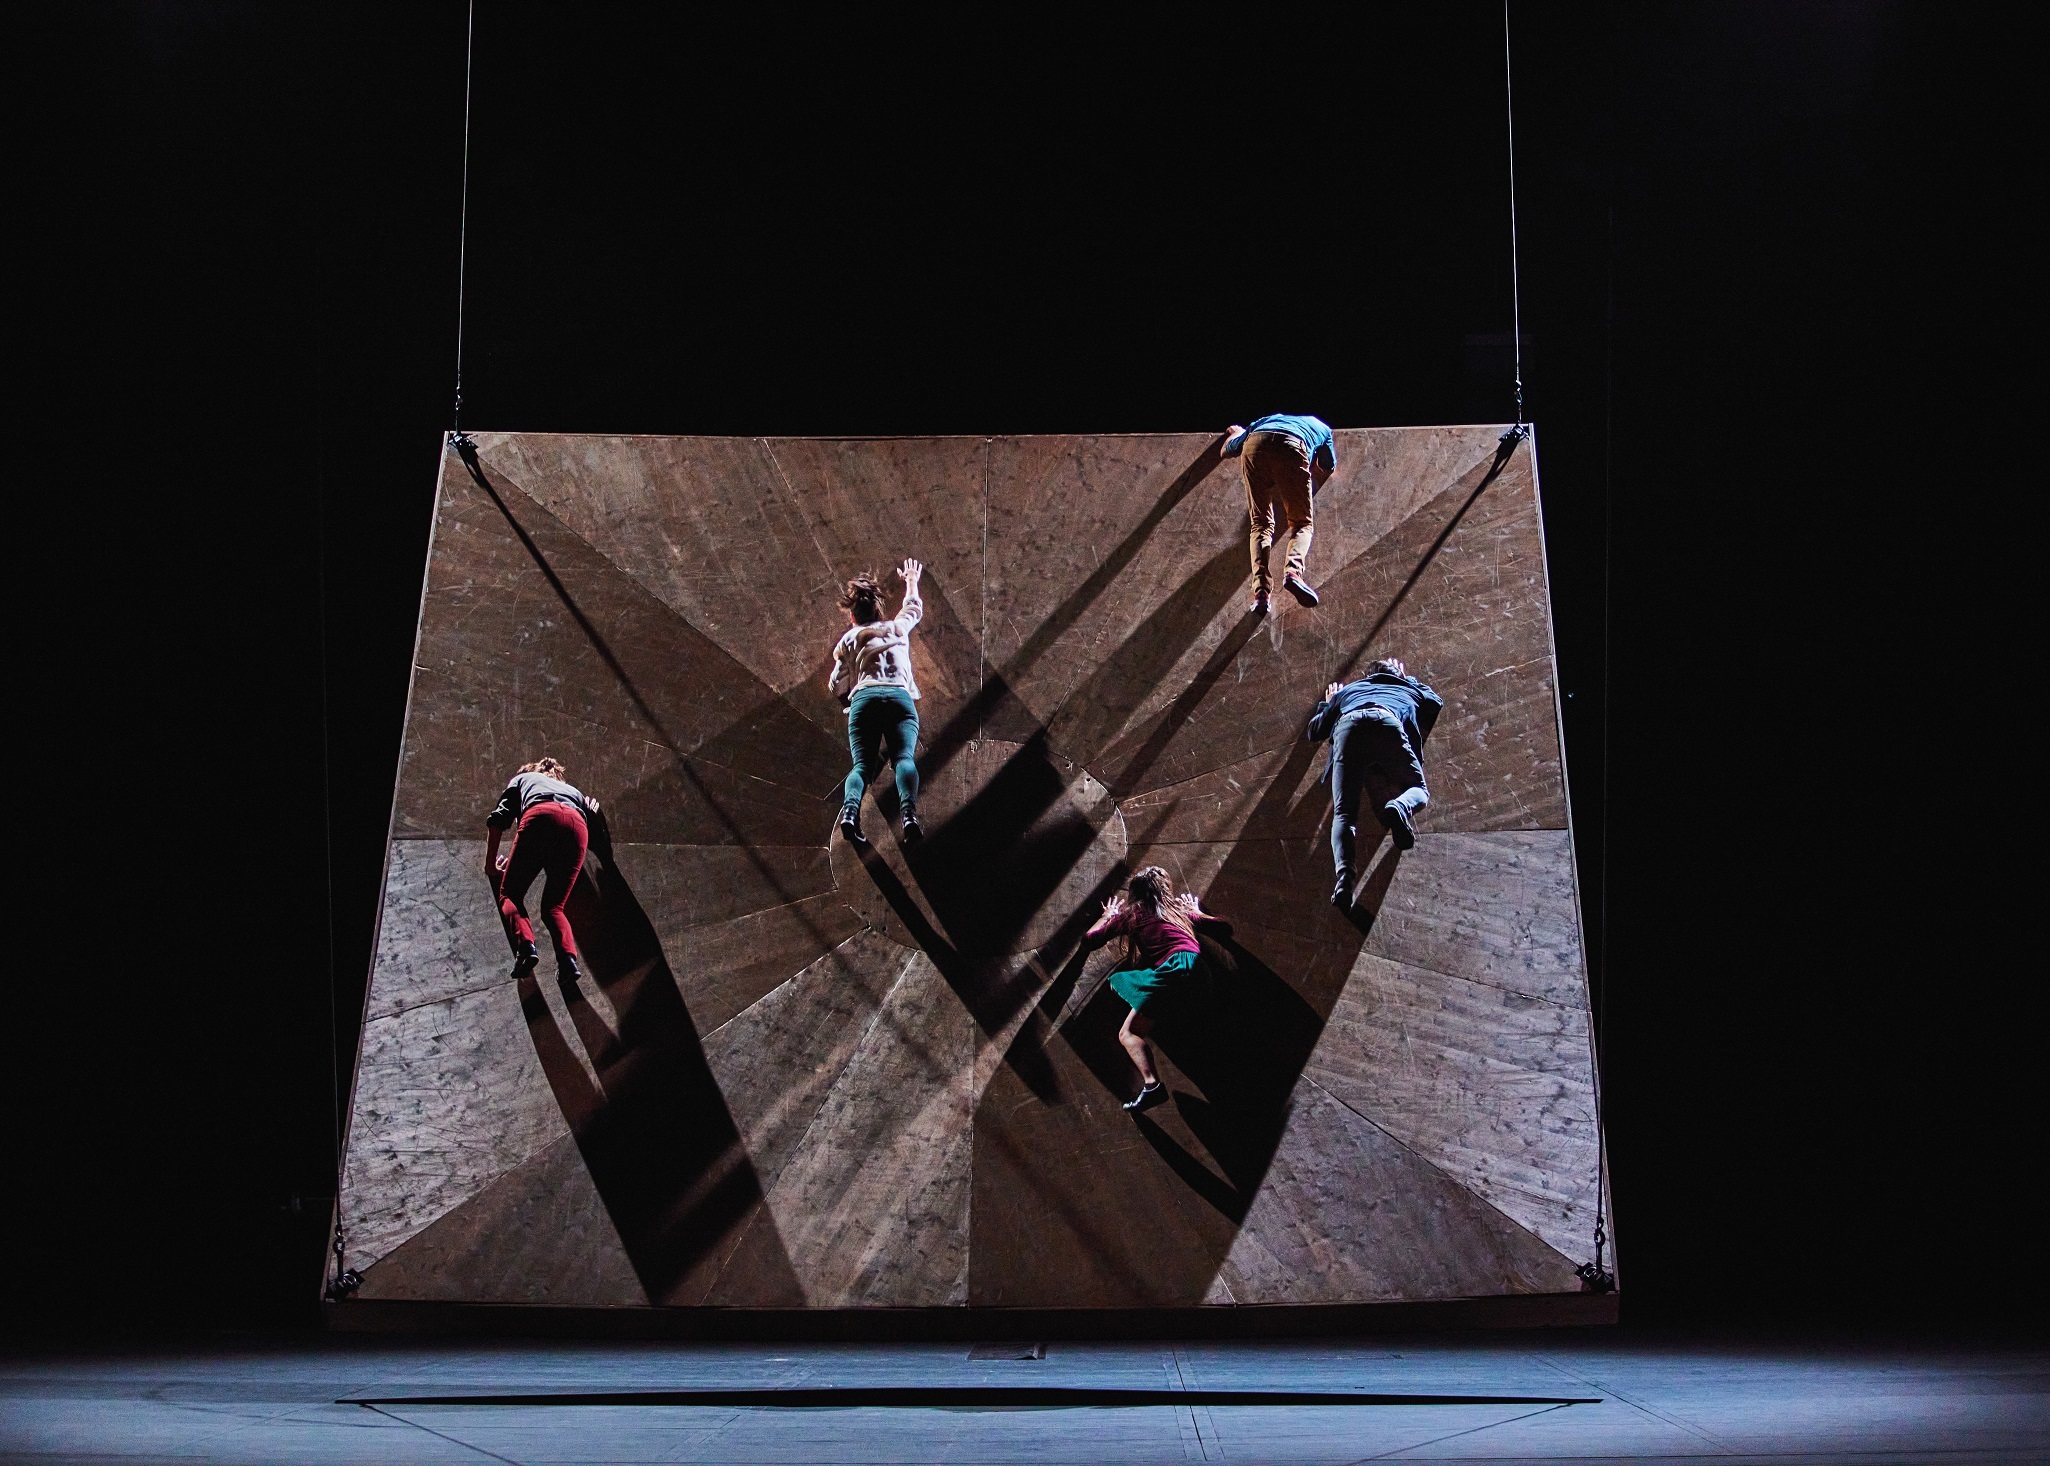 Dancers of the National Choreographic Center of Grenoble balancing on a rectangular platform hanging in the air during the He Who Falls performance